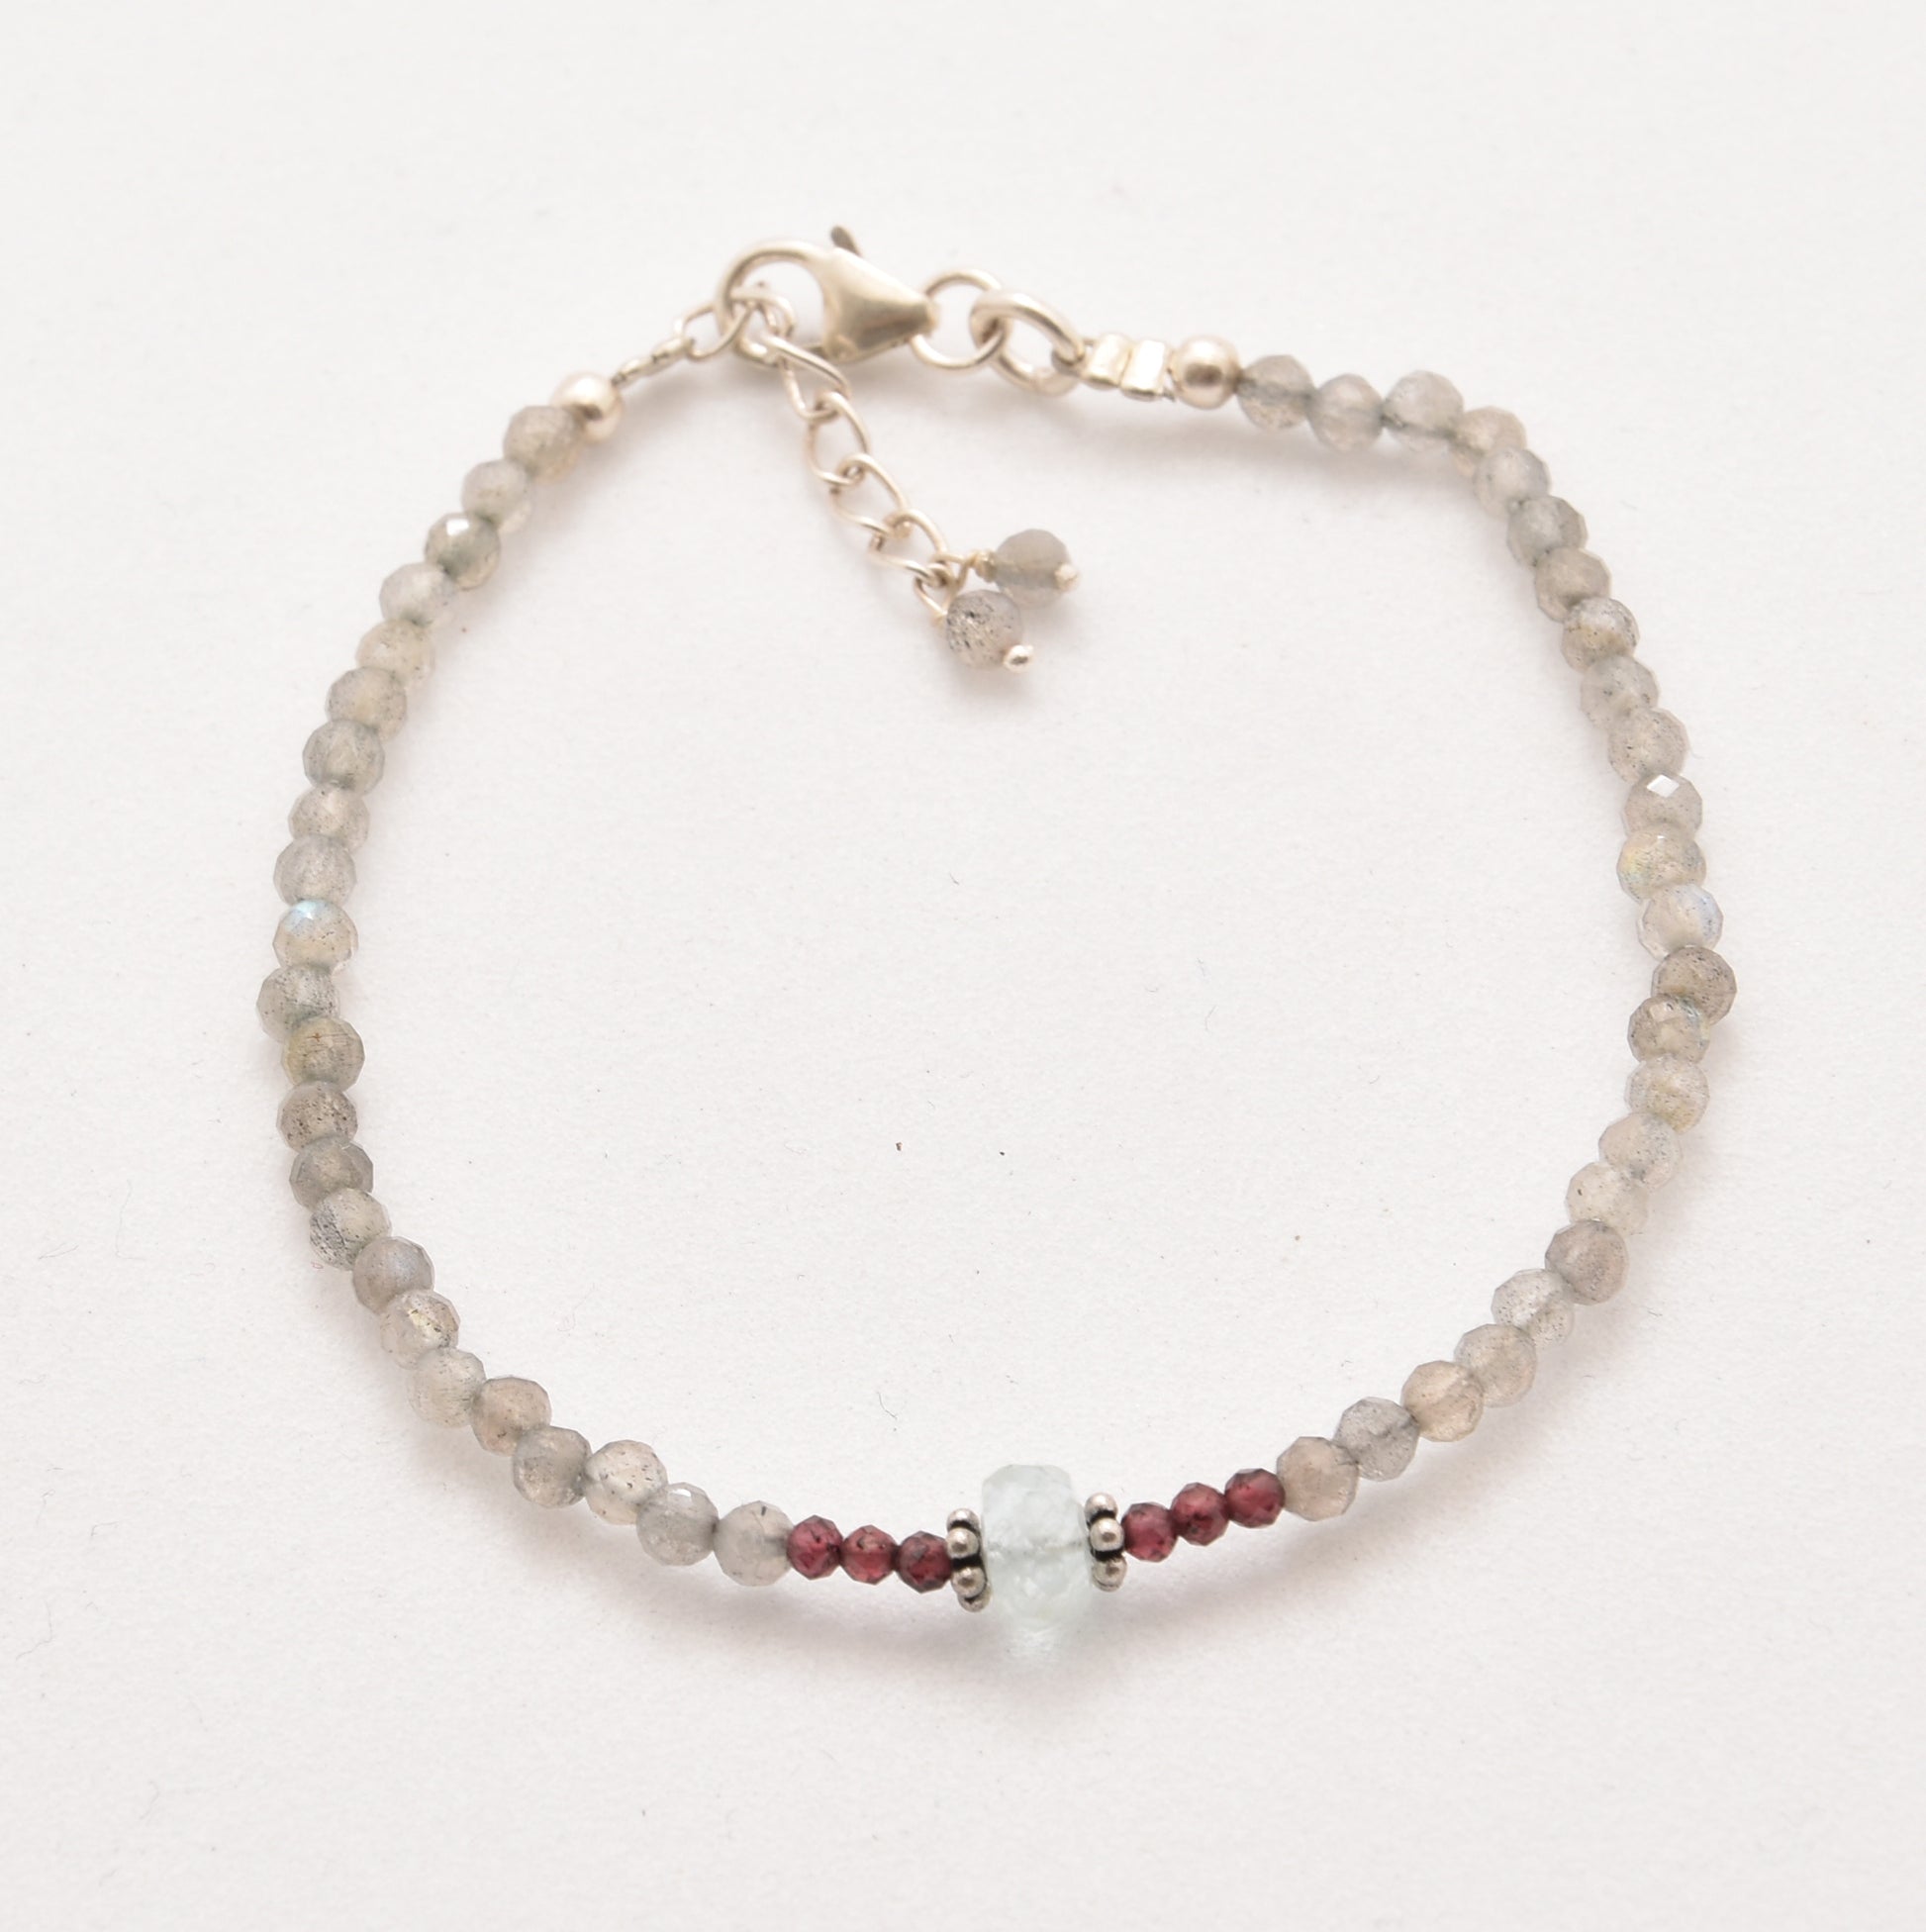 Sterling silver with precious gemstones